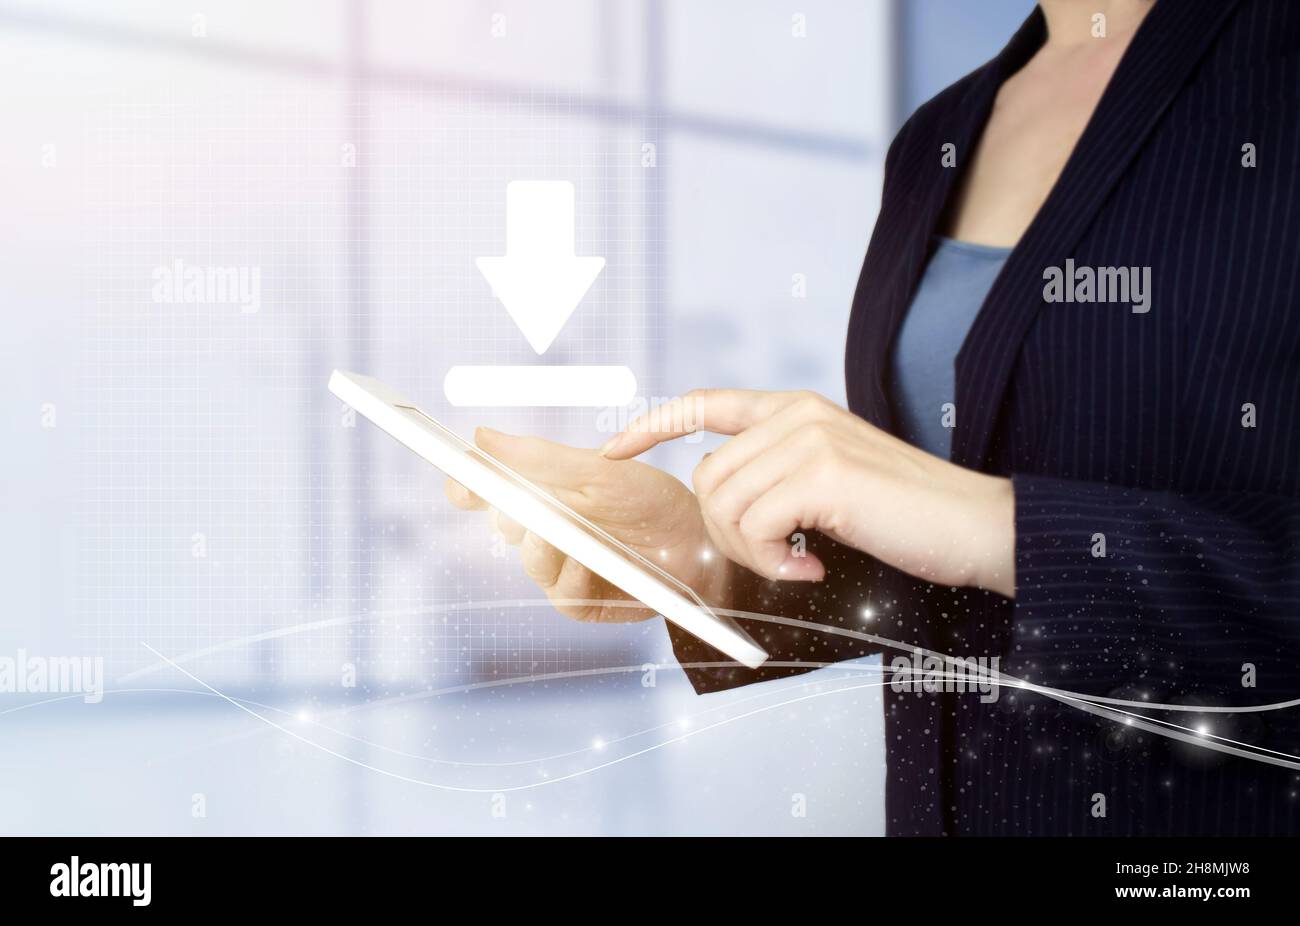 Download Data Storage Business Technology Network Concept. Hand touch white tablet with digital hologram download, data sign on light blurred backgrou Stock Photo